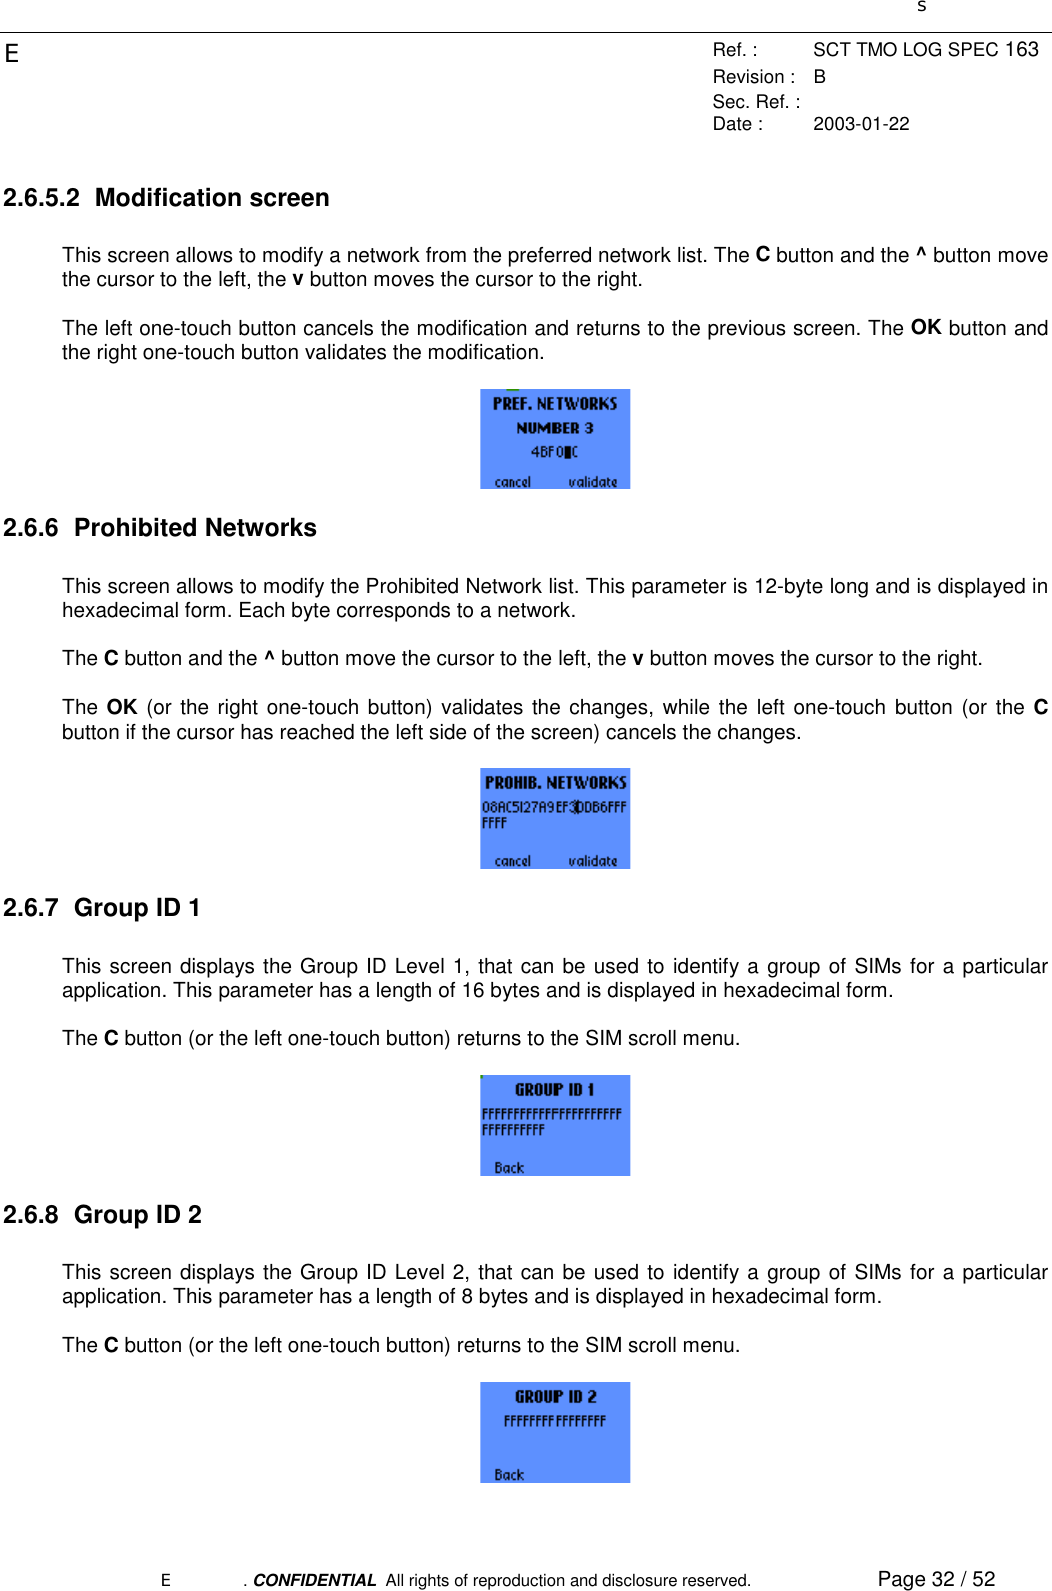 sERef. : SCT TMO LOG SPEC 163Revision : BSec. Ref. :Date : 2003-01-22E. CONFIDENTIAL  All rights of reproduction and disclosure reserved. Page 32 / 522.6.5.2 Modification screenThis screen allows to modify a network from the preferred network list. The C button and the ^ button movethe cursor to the left, the v button moves the cursor to the right.The left one-touch button cancels the modification and returns to the previous screen. The OK button andthe right one-touch button validates the modification.2.6.6 Prohibited NetworksThis screen allows to modify the Prohibited Network list. This parameter is 12-byte long and is displayed inhexadecimal form. Each byte corresponds to a network.The C button and the ^ button move the cursor to the left, the v button moves the cursor to the right.The OK (or the right one-touch button) validates the changes, while the left one-touch button (or the Cbutton if the cursor has reached the left side of the screen) cancels the changes.2.6.7  Group ID 1This screen displays the Group ID Level 1, that can be used to identify a group of SIMs for a particularapplication. This parameter has a length of 16 bytes and is displayed in hexadecimal form.The C button (or the left one-touch button) returns to the SIM scroll menu.2.6.8  Group ID 2This screen displays the Group ID Level 2, that can be used to identify a group of SIMs for a particularapplication. This parameter has a length of 8 bytes and is displayed in hexadecimal form.The C button (or the left one-touch button) returns to the SIM scroll menu.